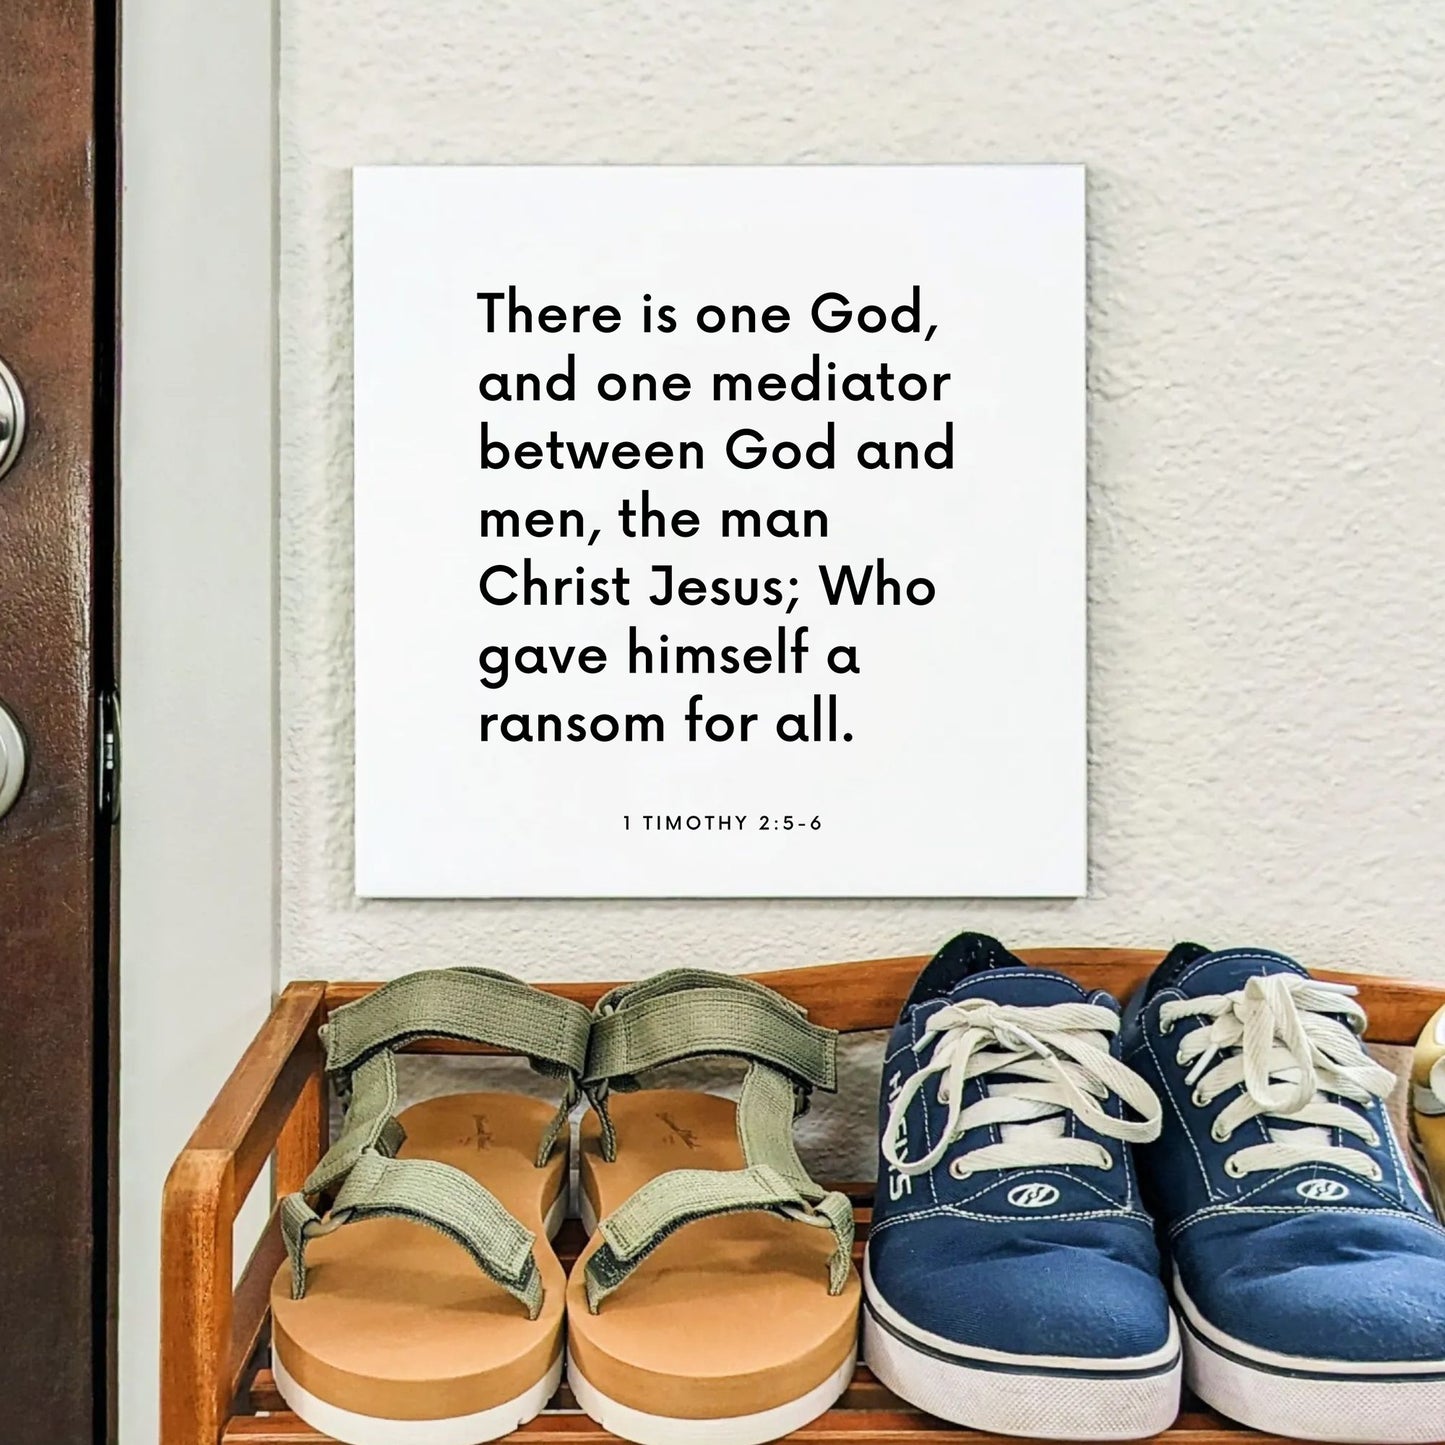 Shoes mouting of the scripture tile for 1 Timothy 2:5-6 - "There is one God, and one mediator between God and men"